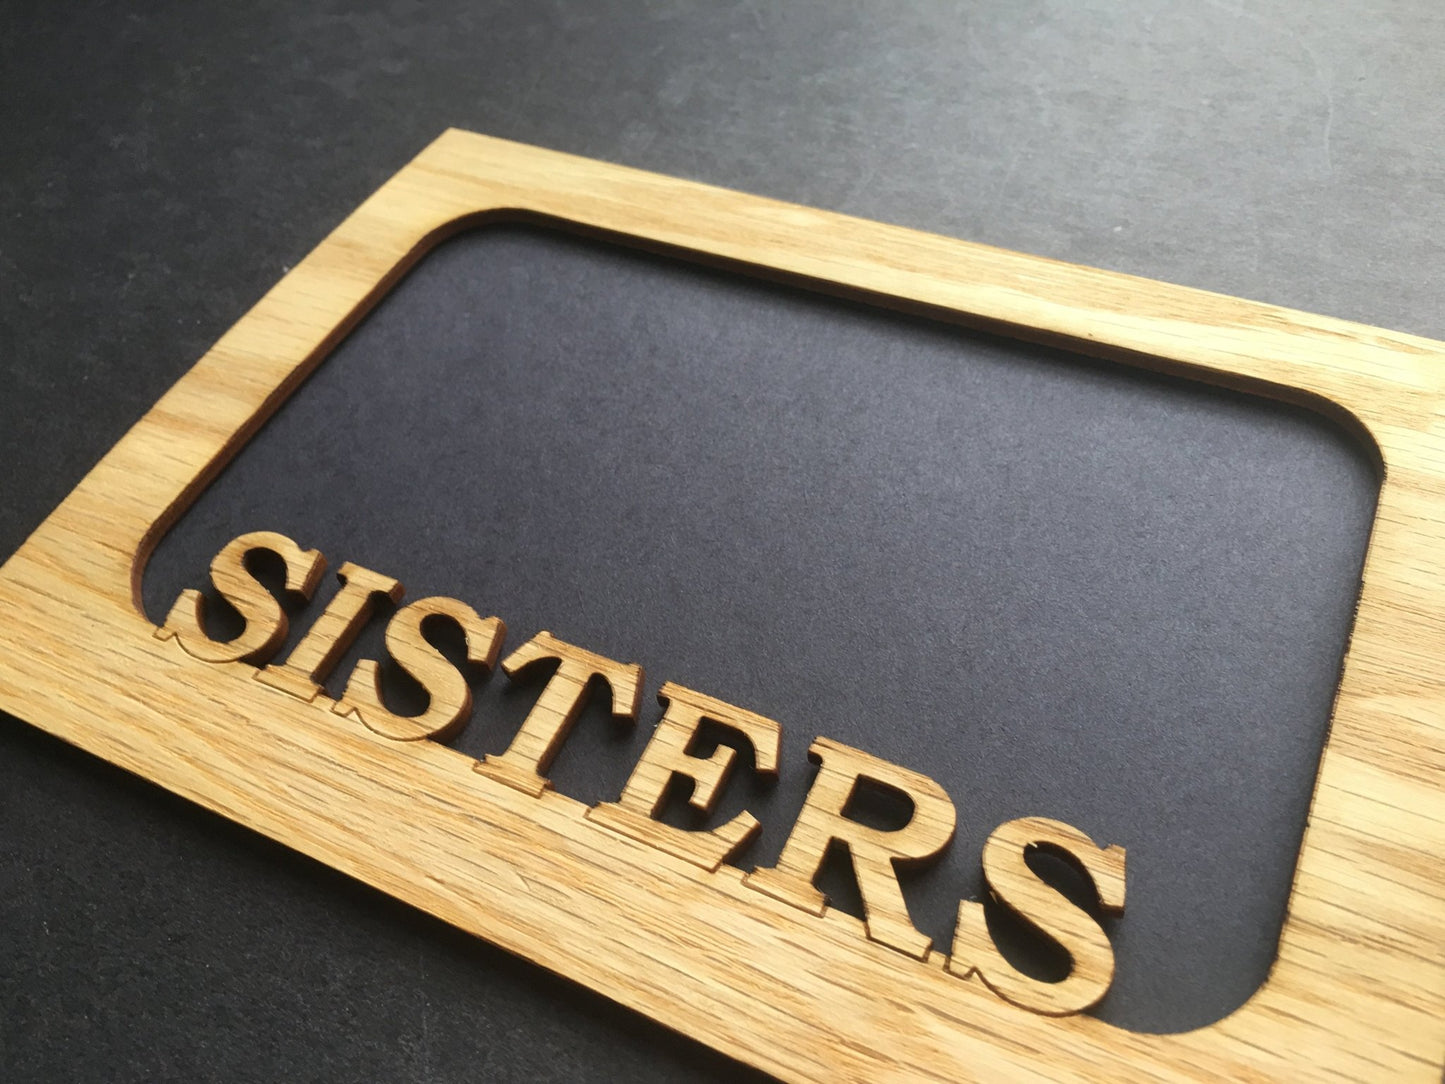 Sisters Picture Frame - 5x7 Frame Hold 4x6 Photo - Legacy Images - Picture Frames